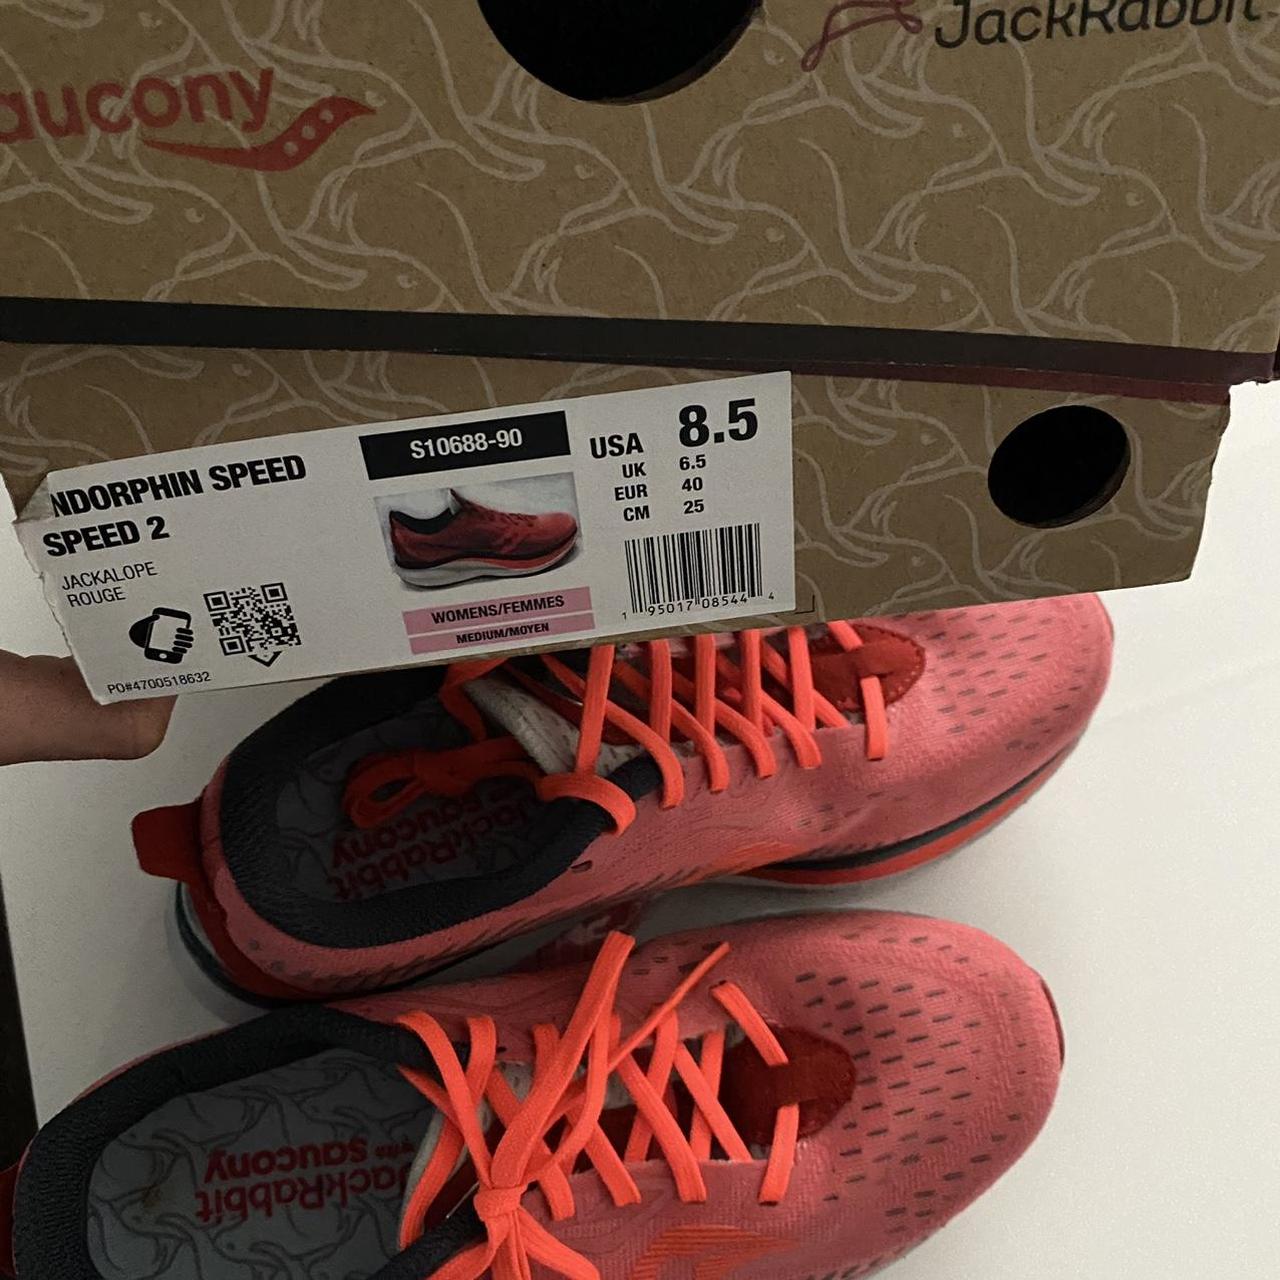 Product Image 3 - Saucony Endorphin Speed 2
Womens size